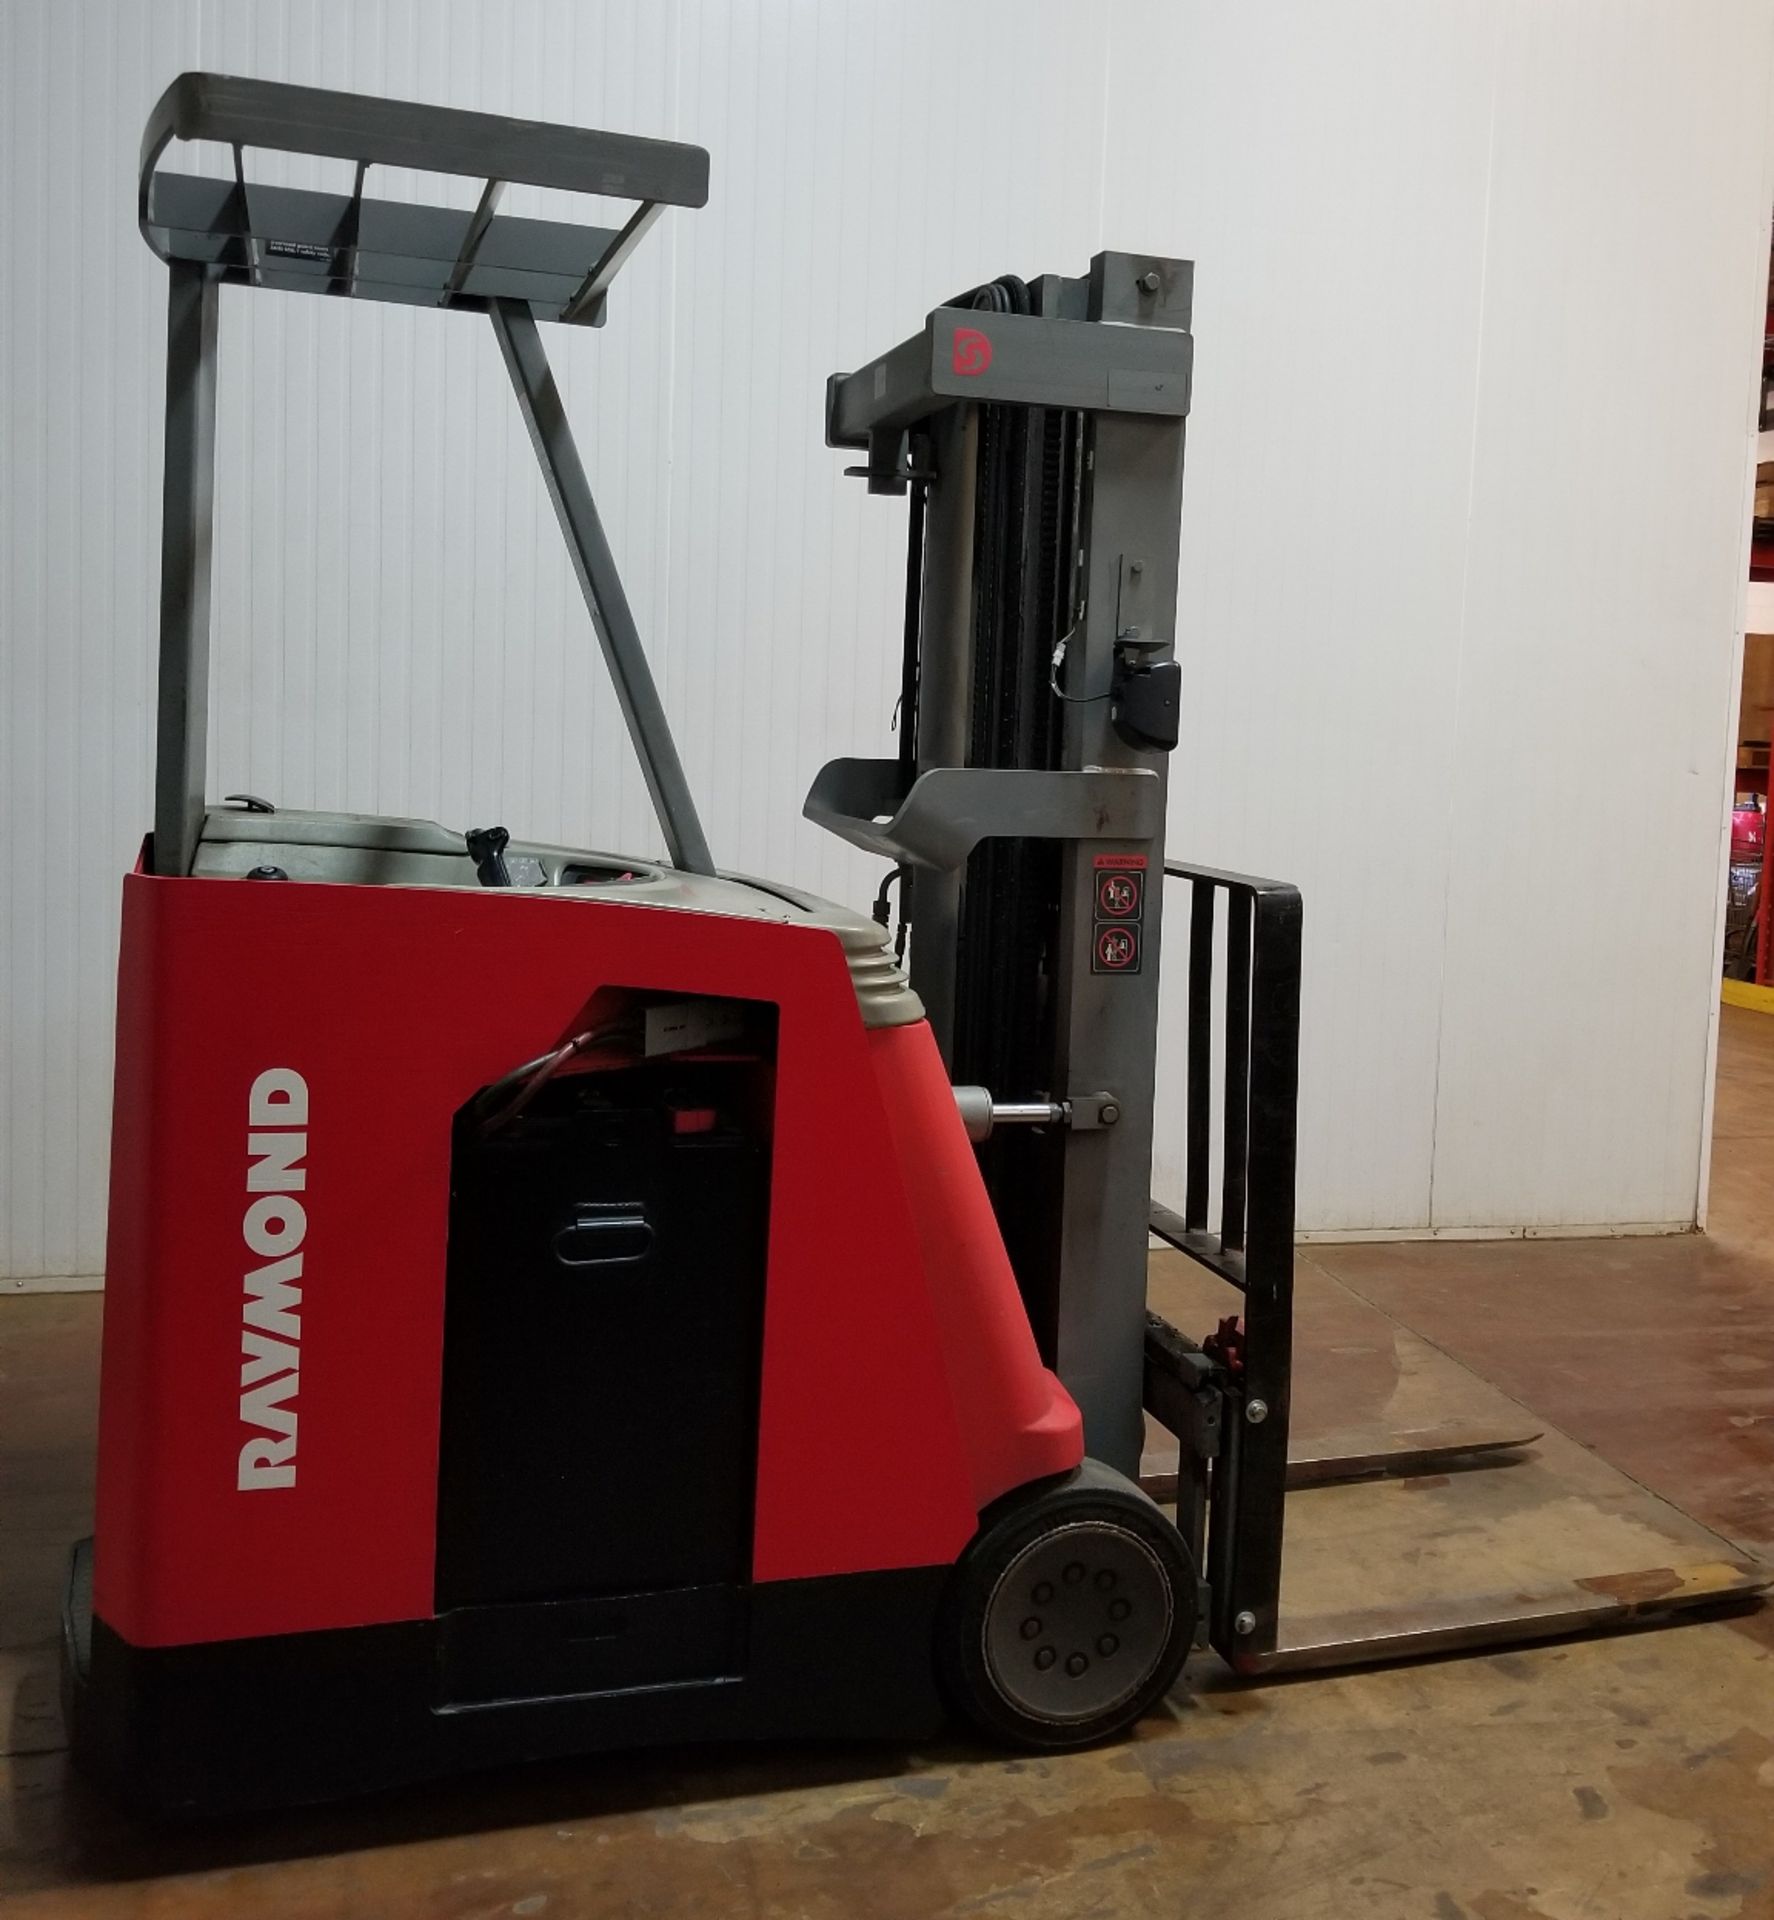 RAYMOND (2000) DSS350 3500 LB. CAPACITY 36V ELECTRIC COUNTERBALANCE FORKLIFT WITH 203" MAX. LIFT - Image 2 of 2